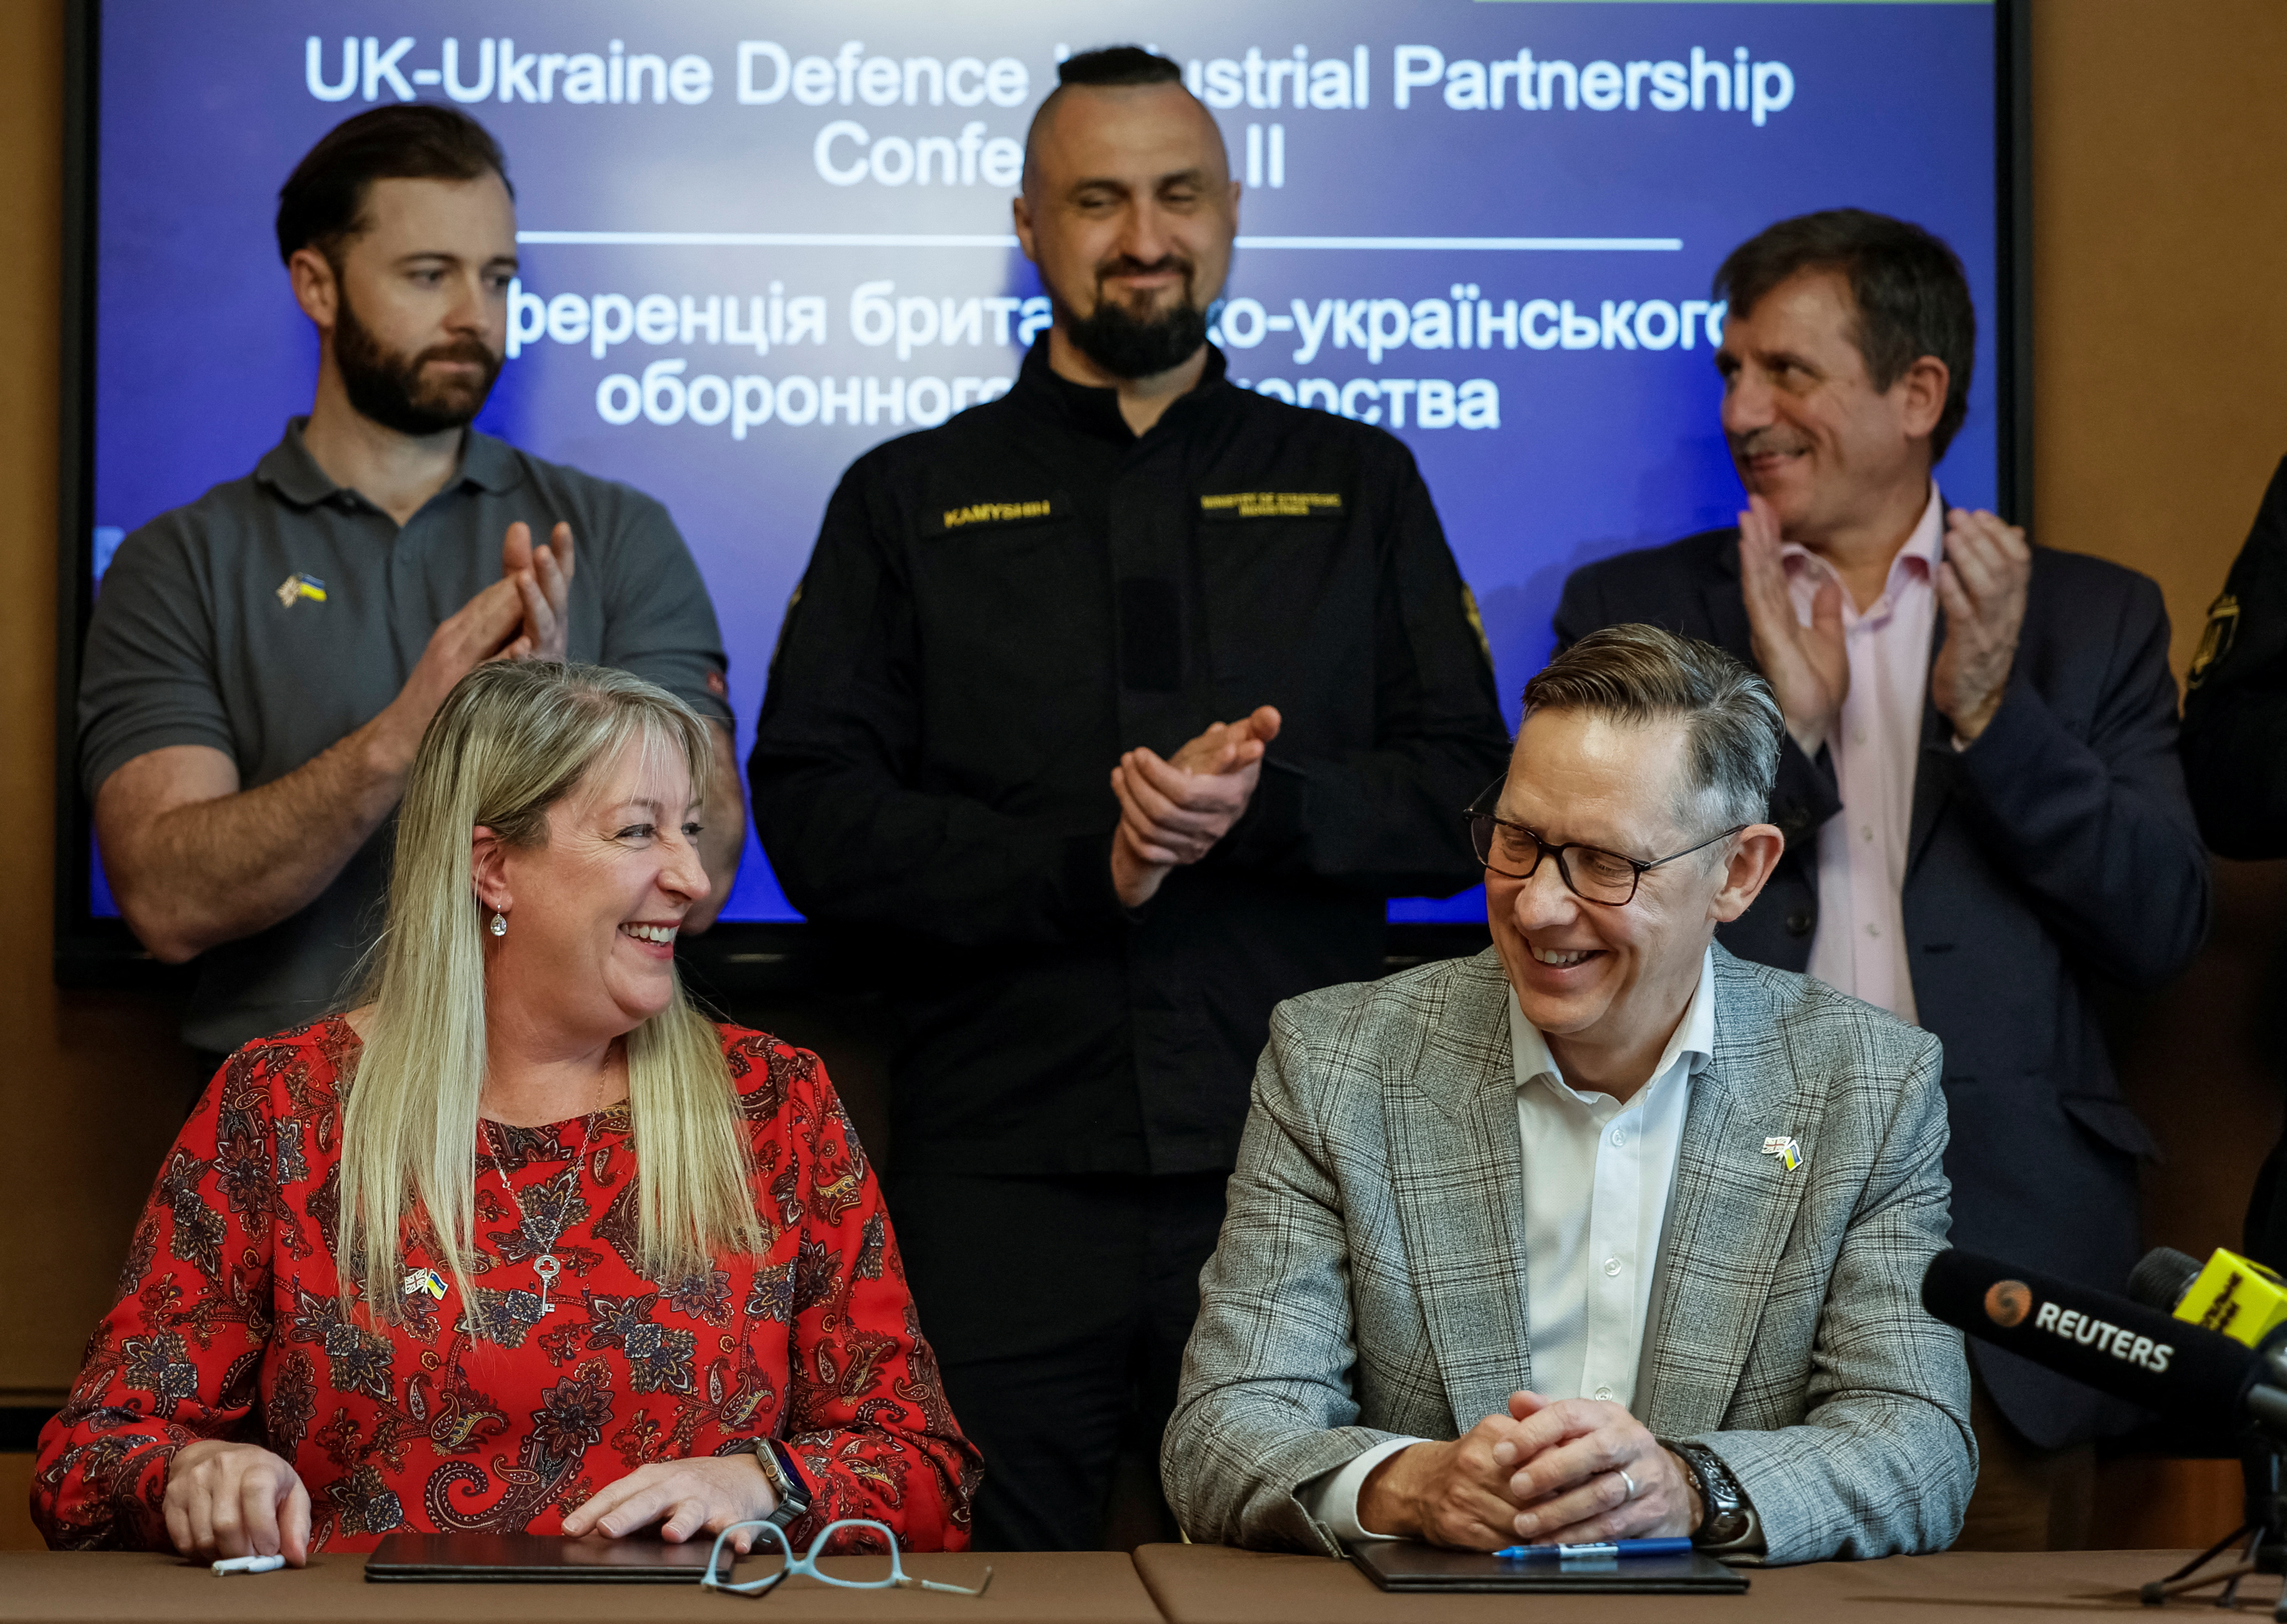 Ukrainian and British governments sign a framework agreement to cooperate in the defence and weapon production sector, in Kyiv